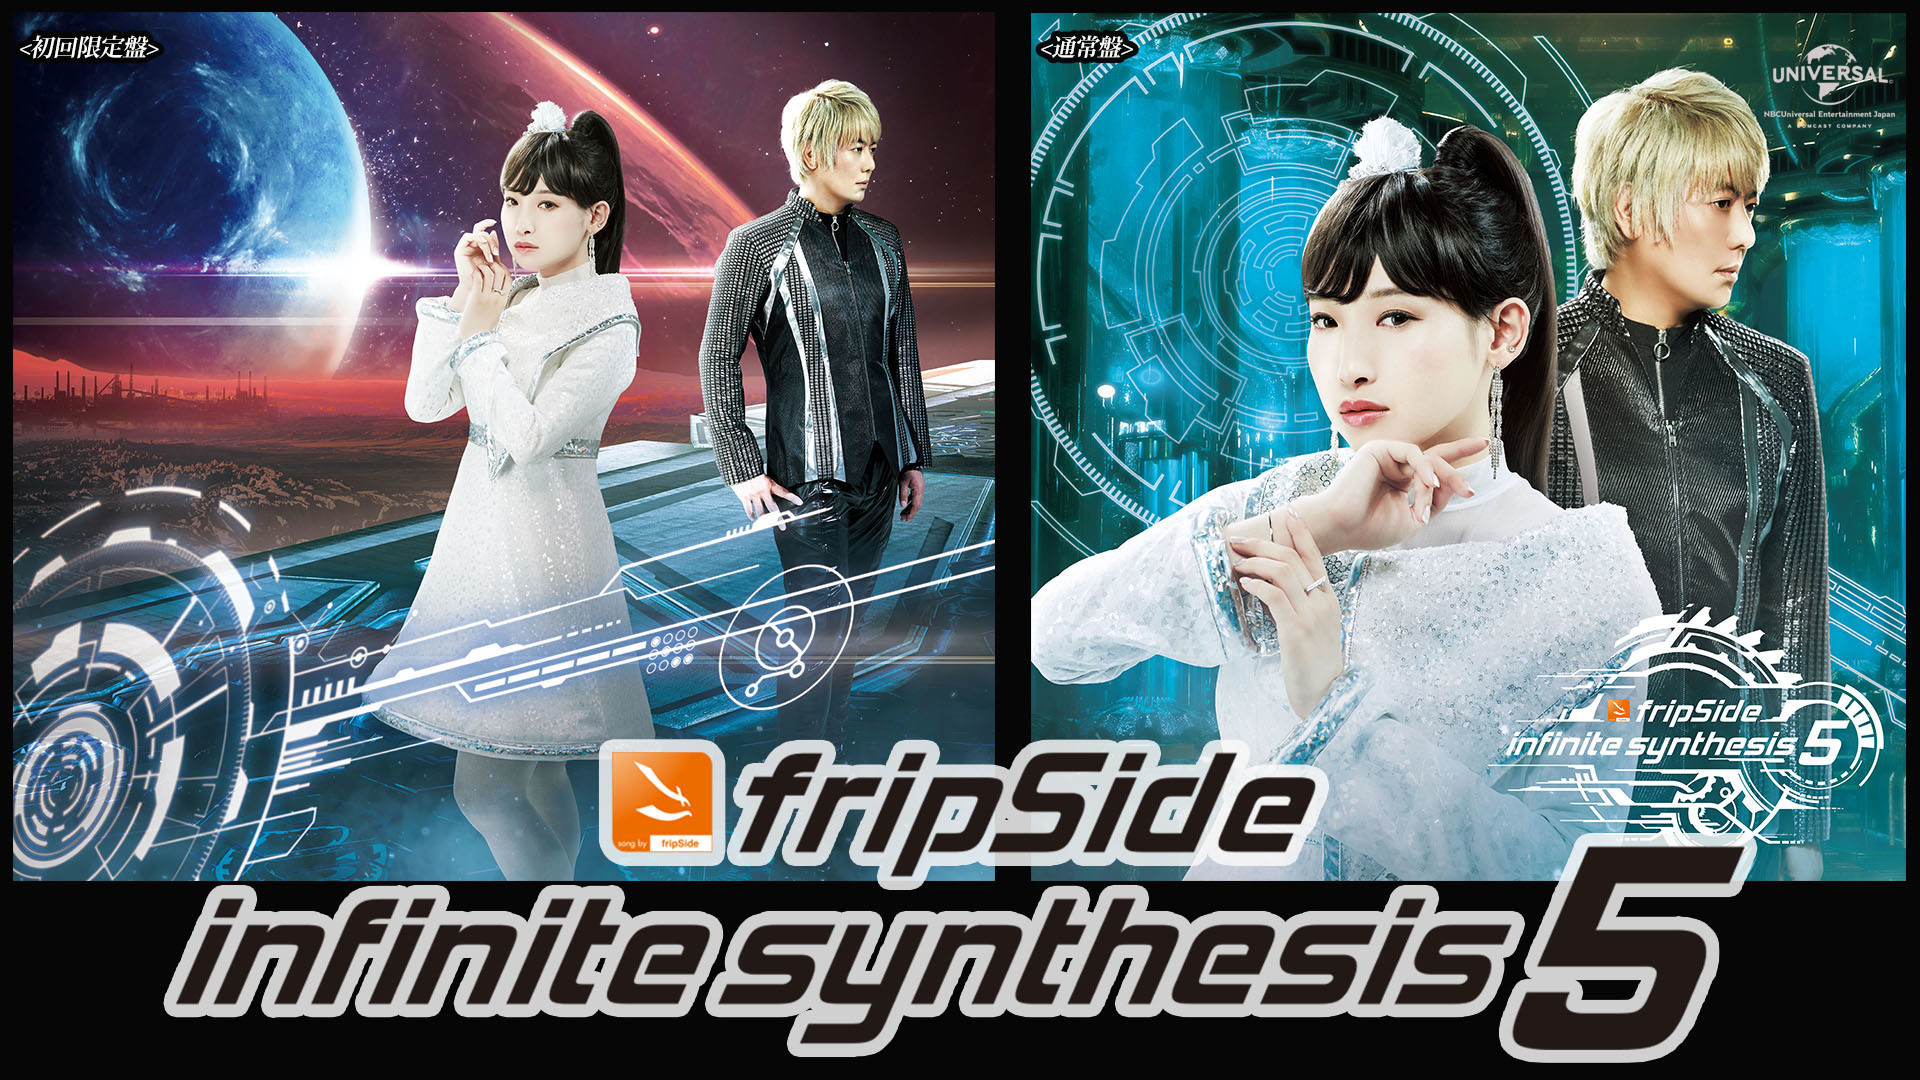 infinite synthesis 5 ジャケット＆収録曲公開 | fripSide OFFICIAL SITE